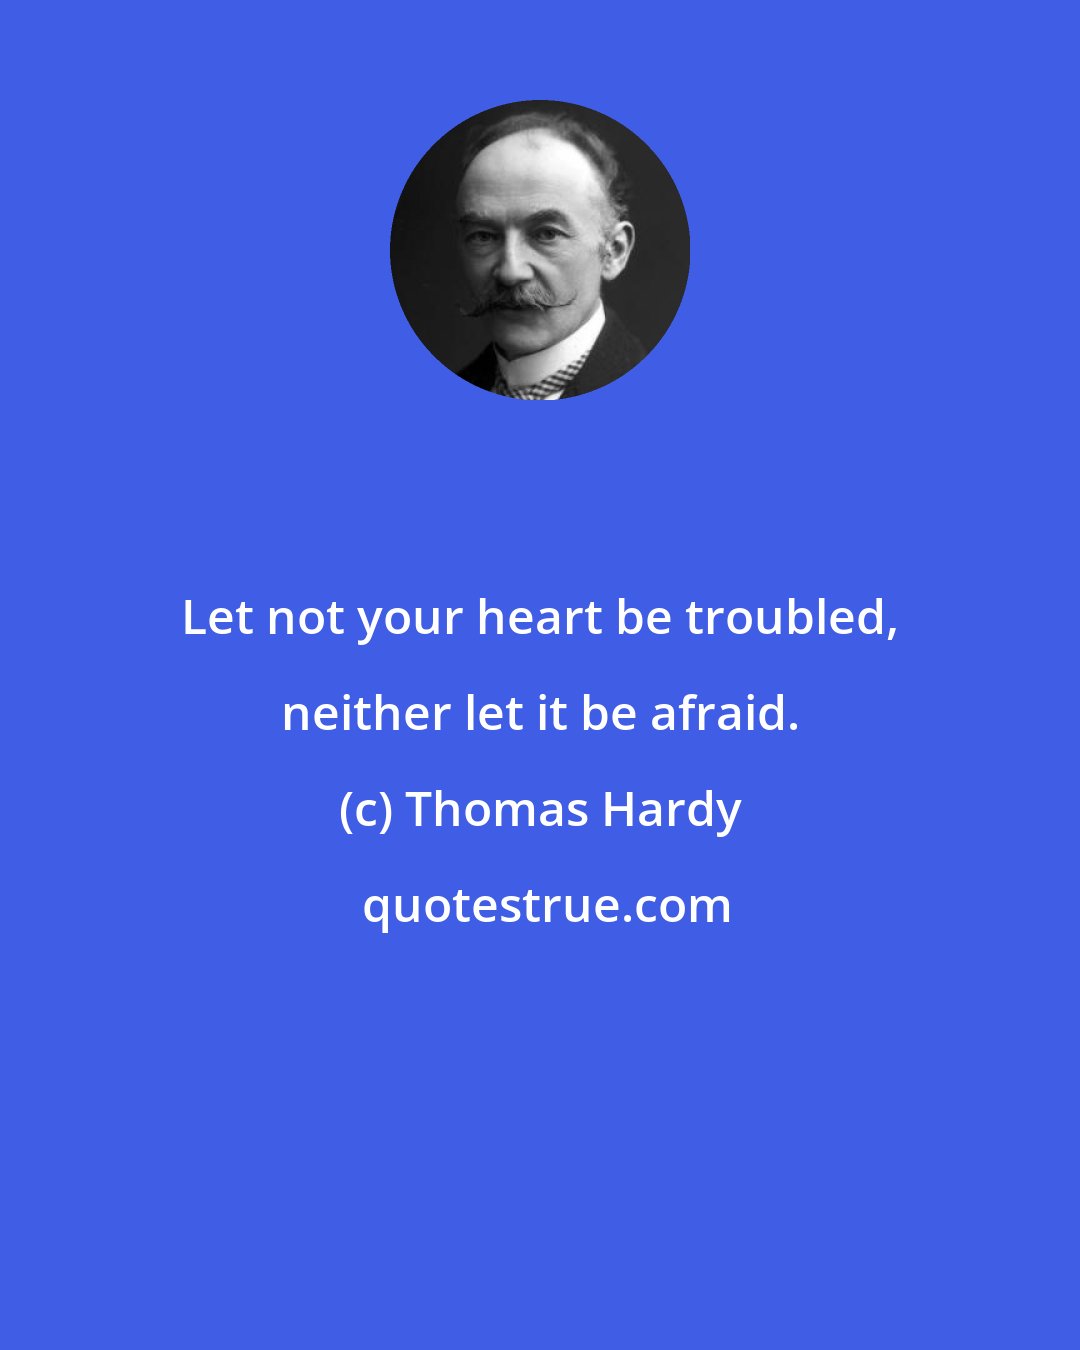 Thomas Hardy: Let not your heart be troubled, neither let it be afraid.